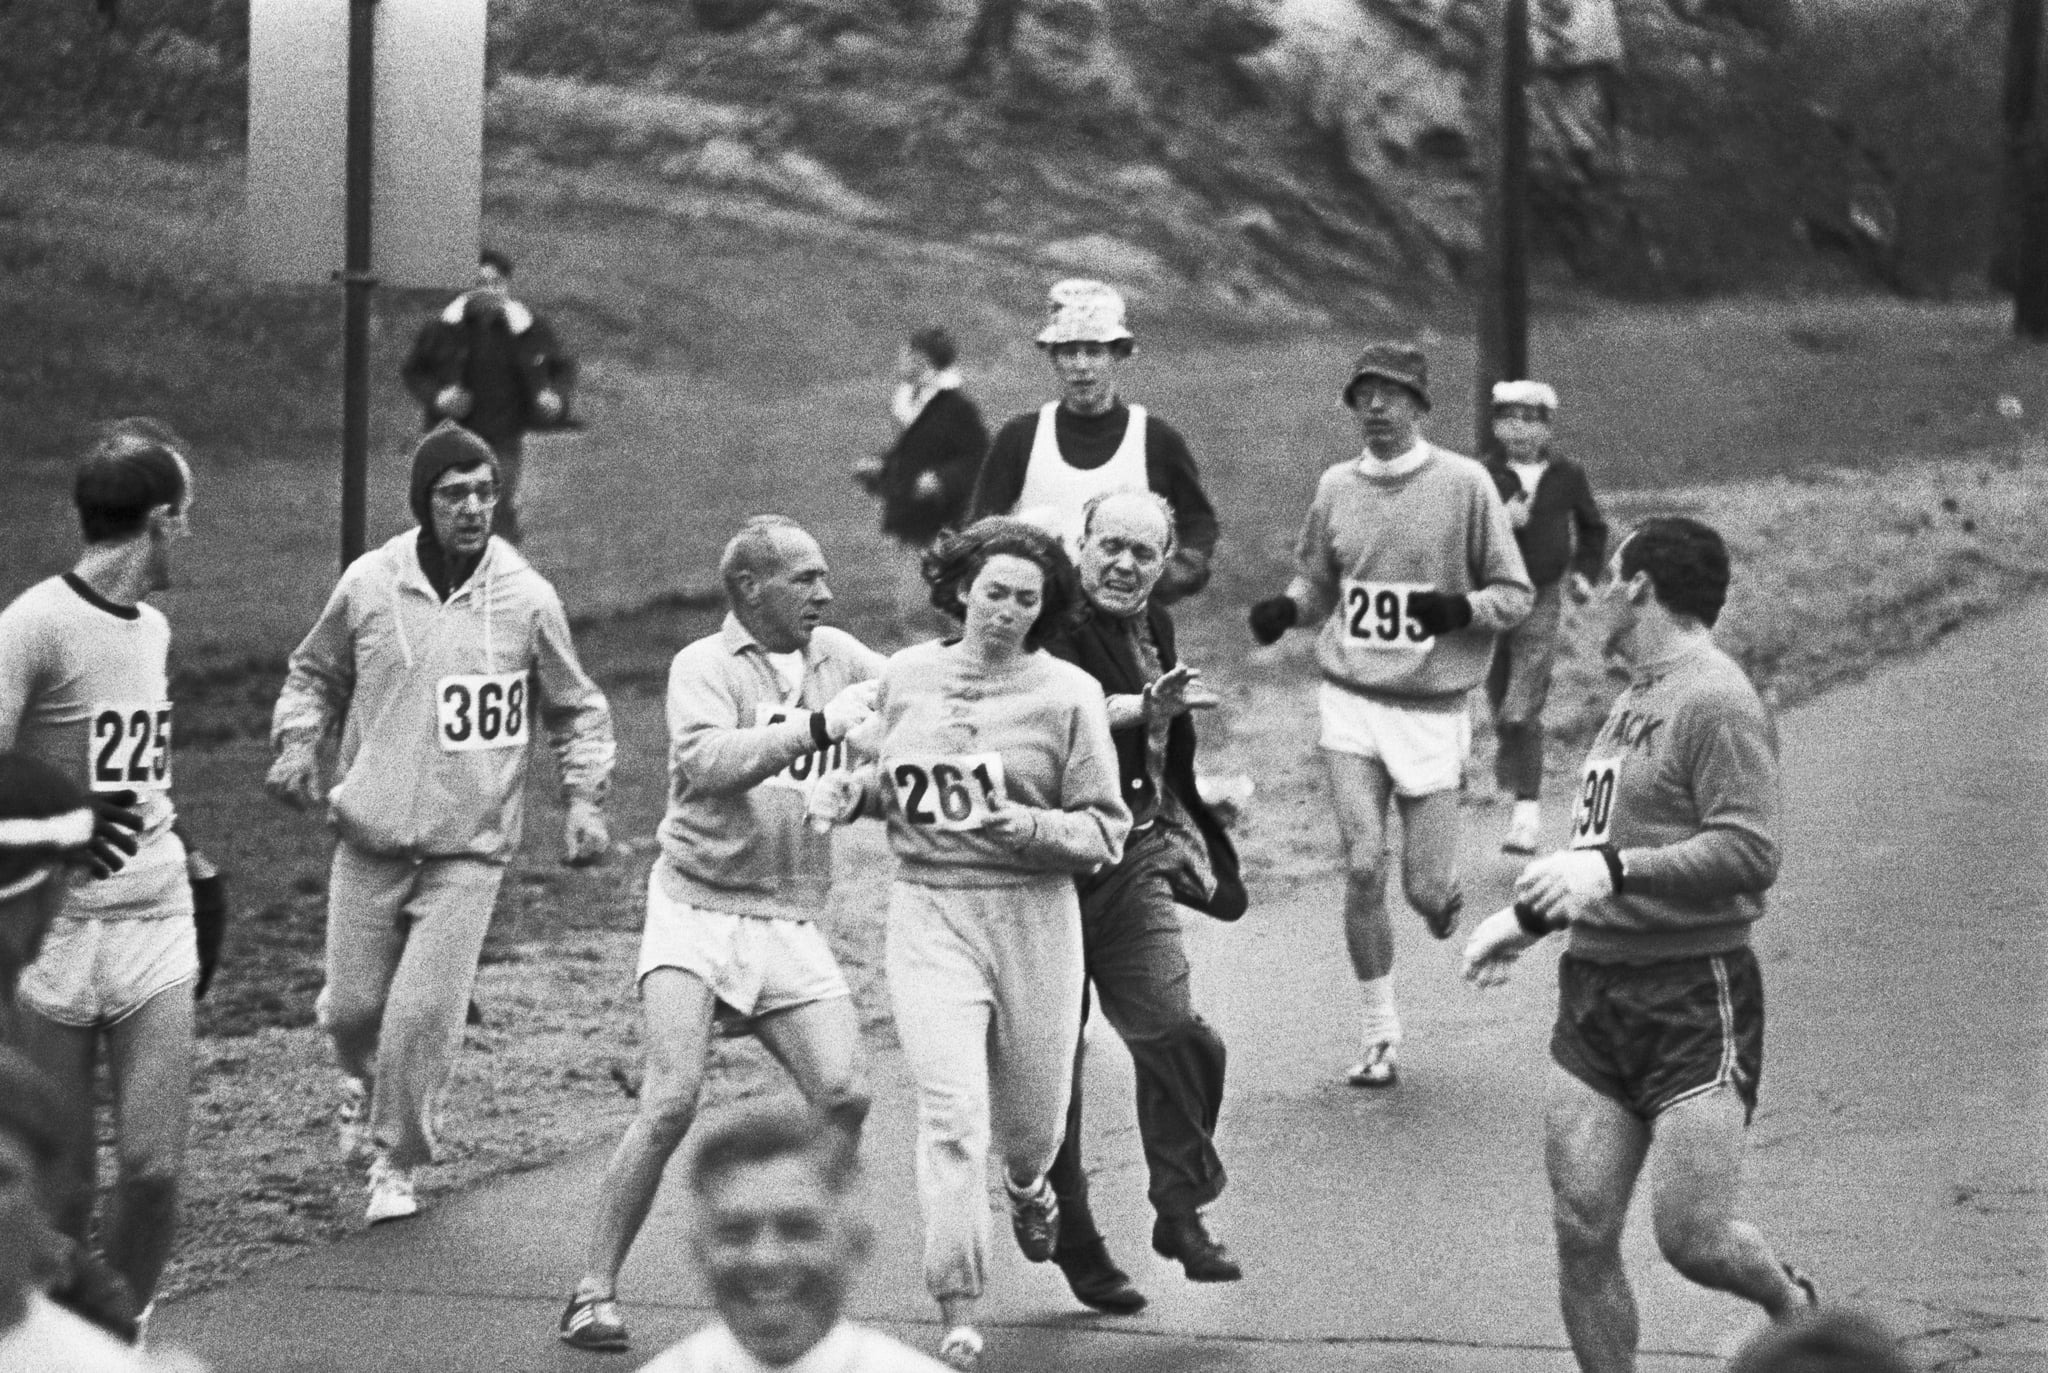 Trainer Jock Semple -- in street clothes -- enters the field of runners (left) to try to pull Kathy Switzer (261) out of the race. Male runners move in to form a protective curtain around female track hopeful until the protesting trainer is finally wedged out of the race